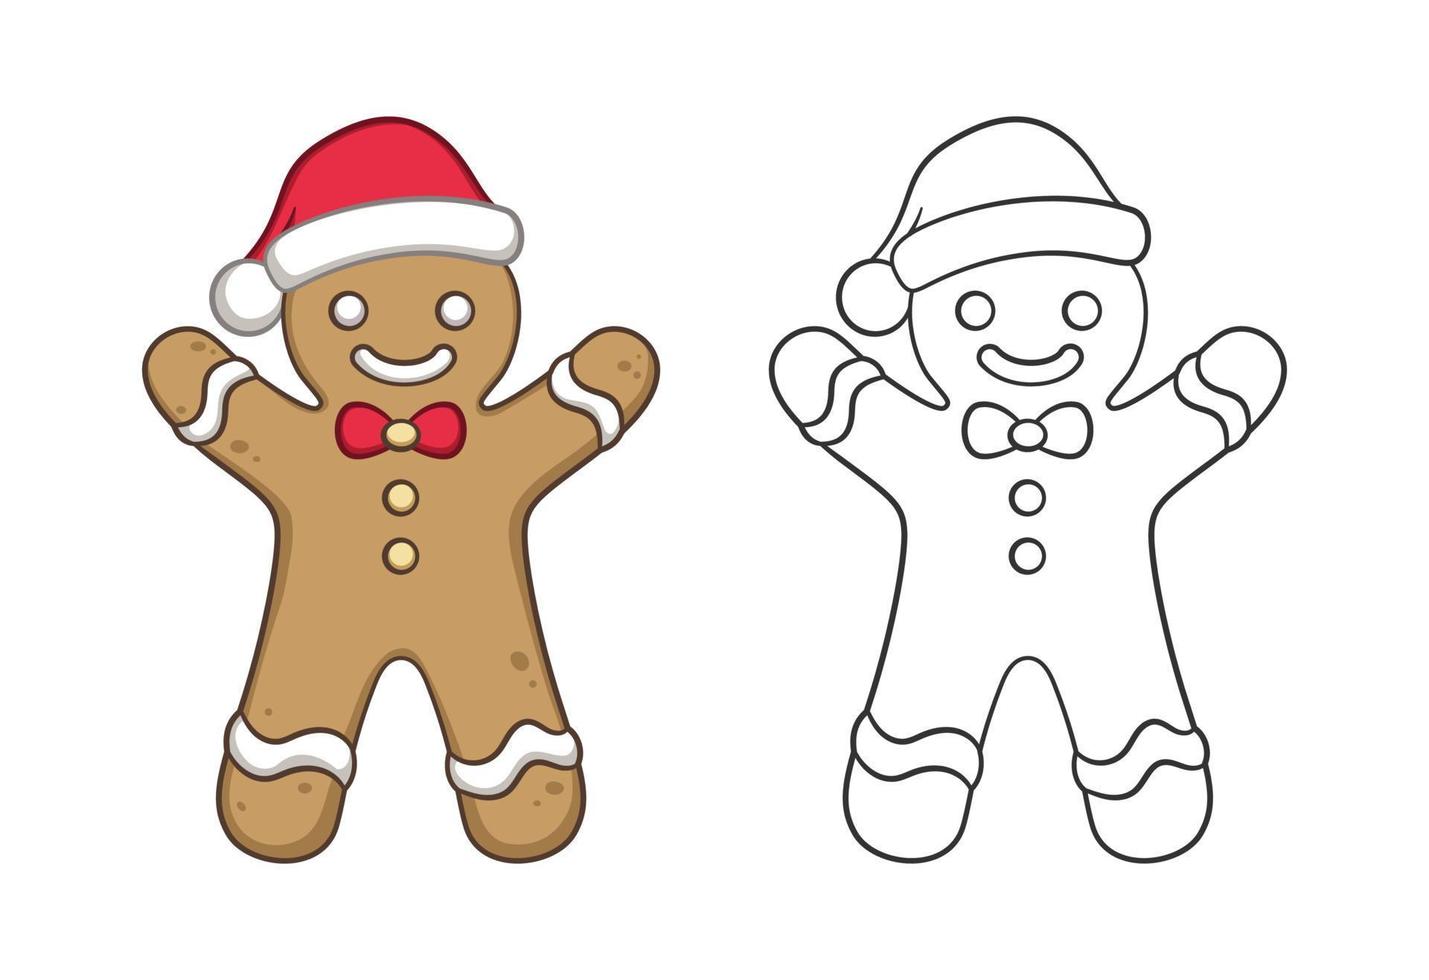 Cute gingerbread man with a bow tie and Santa hat outline and colored doodle cartoon illustration set. Winter Christmas theme coloring book page activity for kids and adults. vector